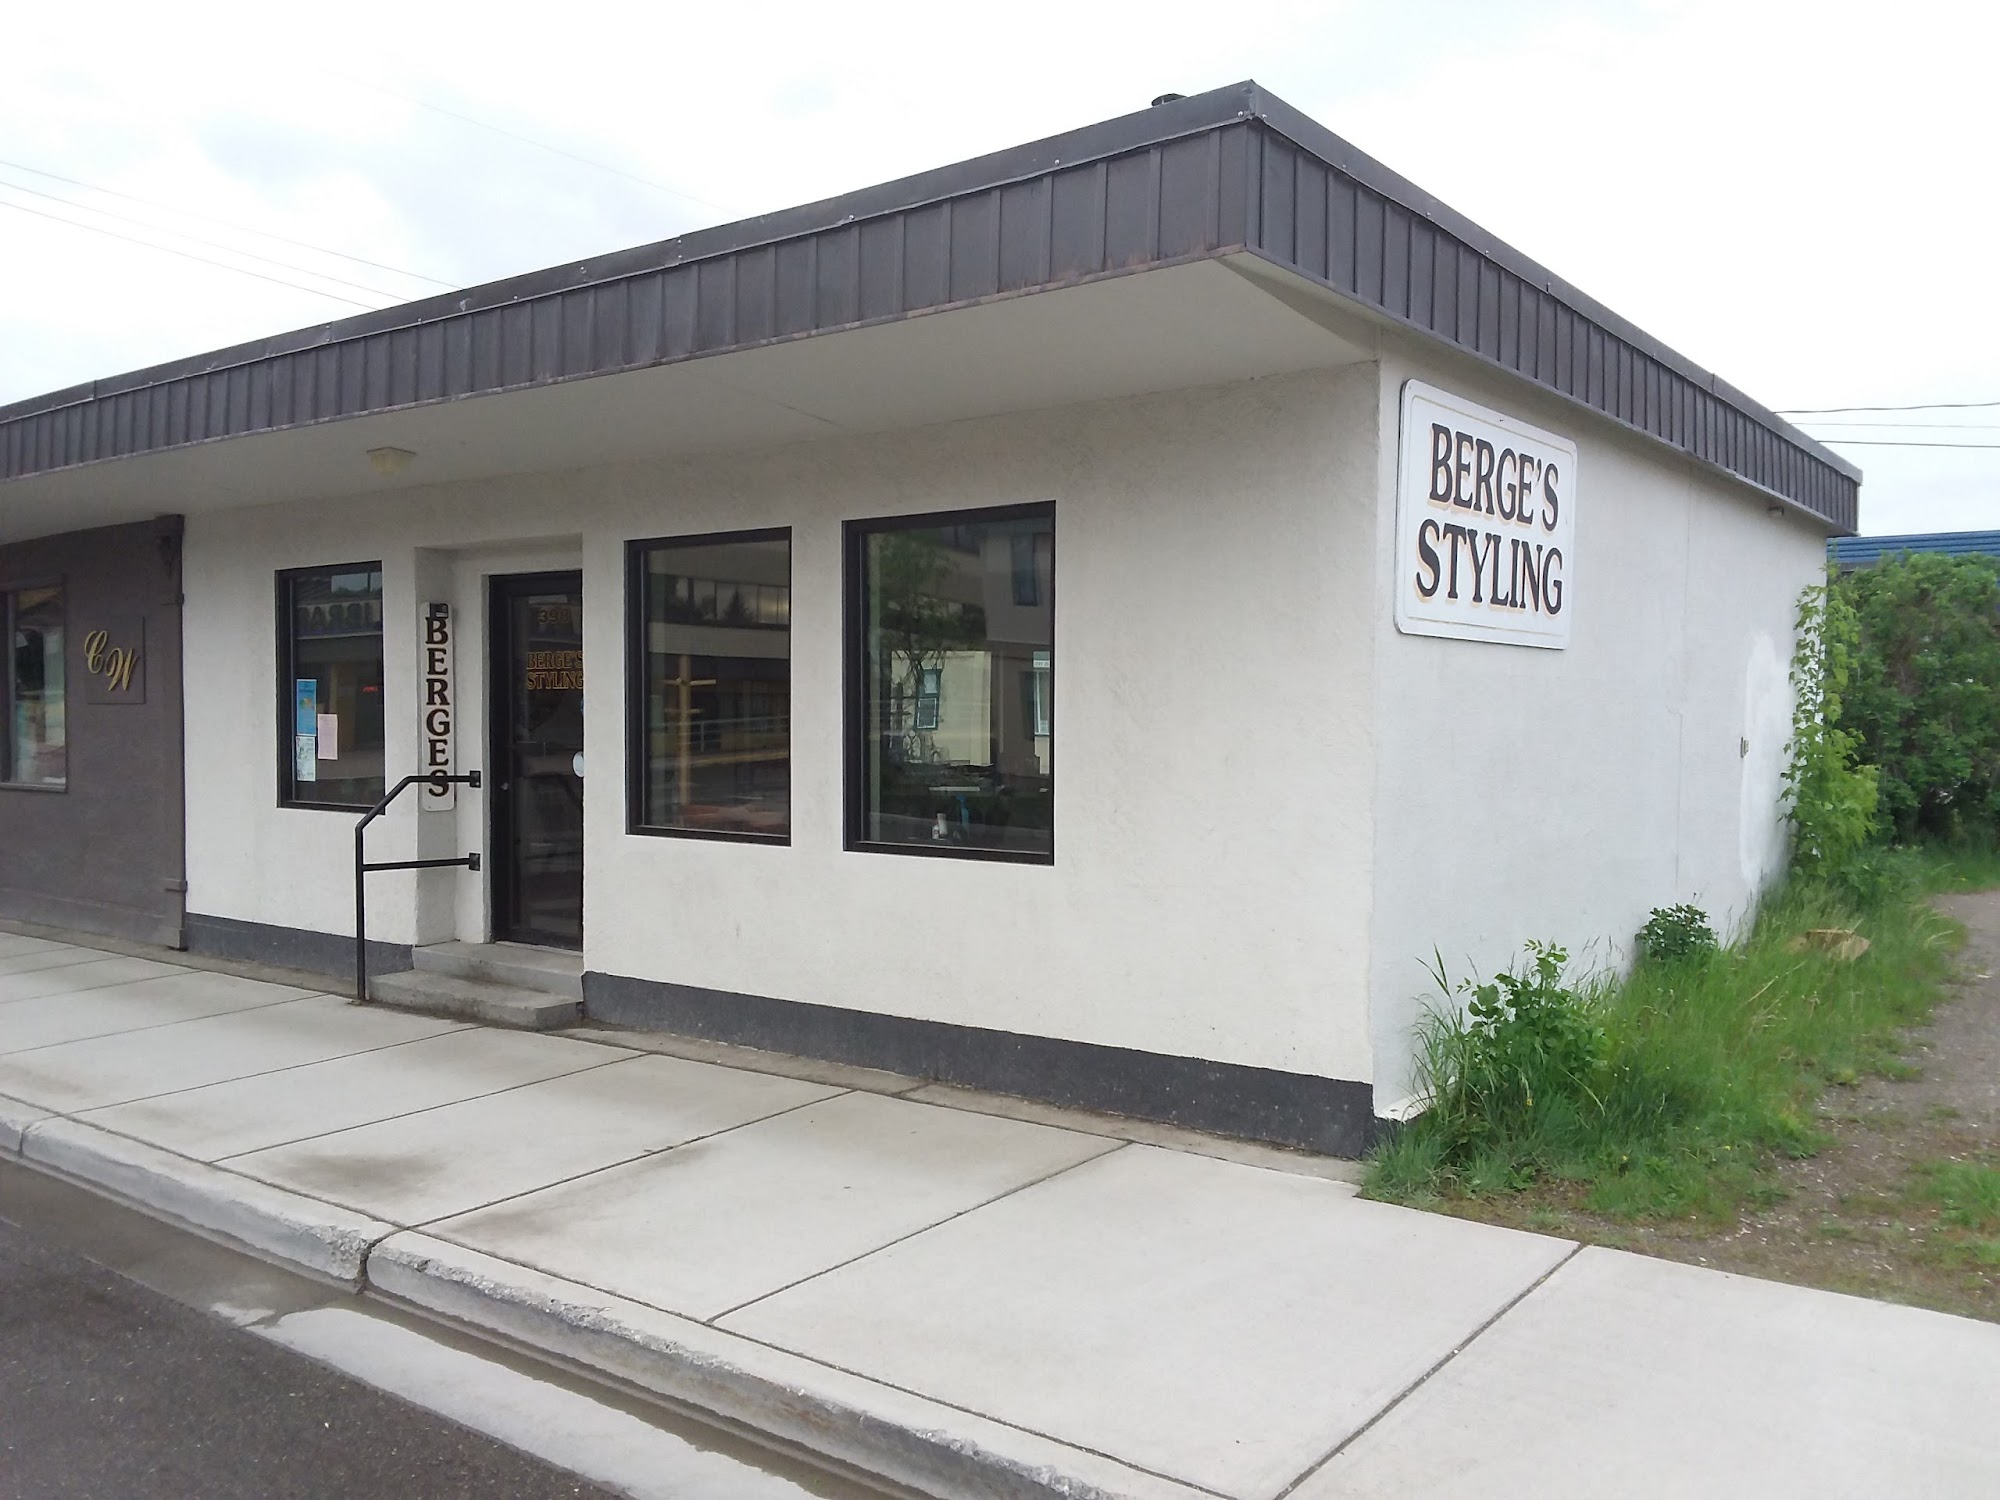 Berges Styling 398 St Laurent Ave, Quesnel British Columbia V2J 5A3